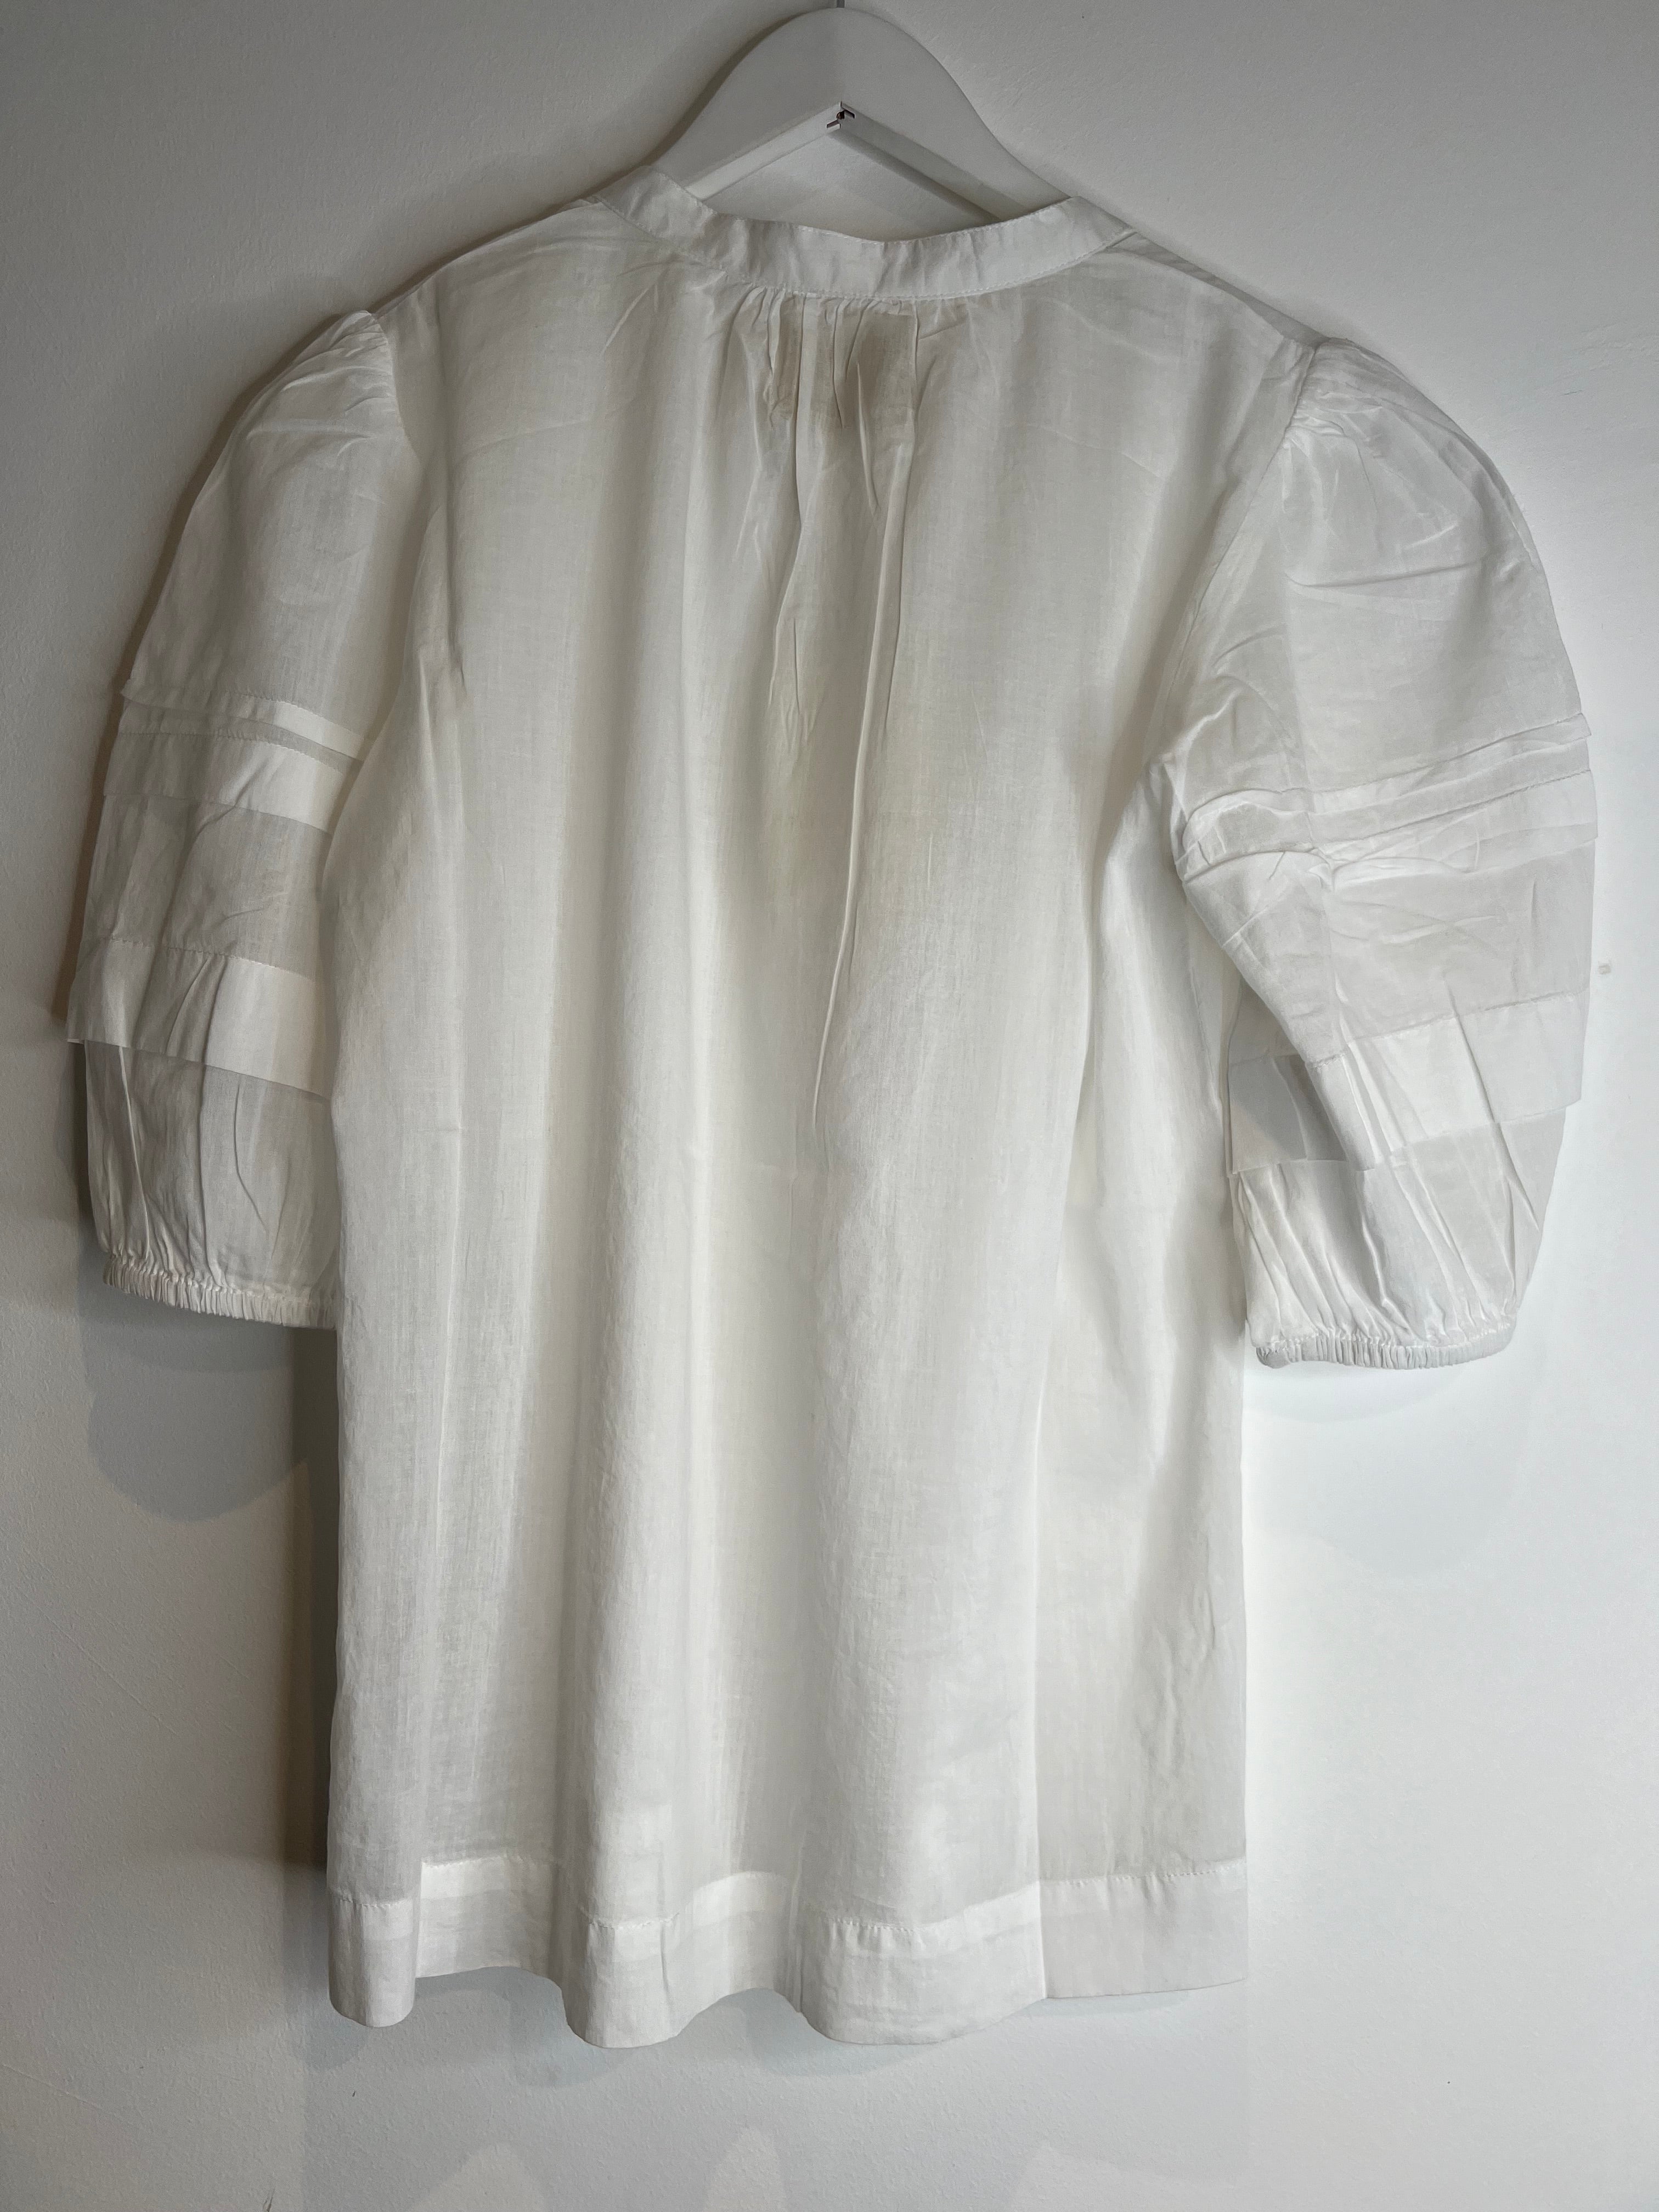 Hetre Alresford Hampshire Clothes Store Stella Forest White Blouse 